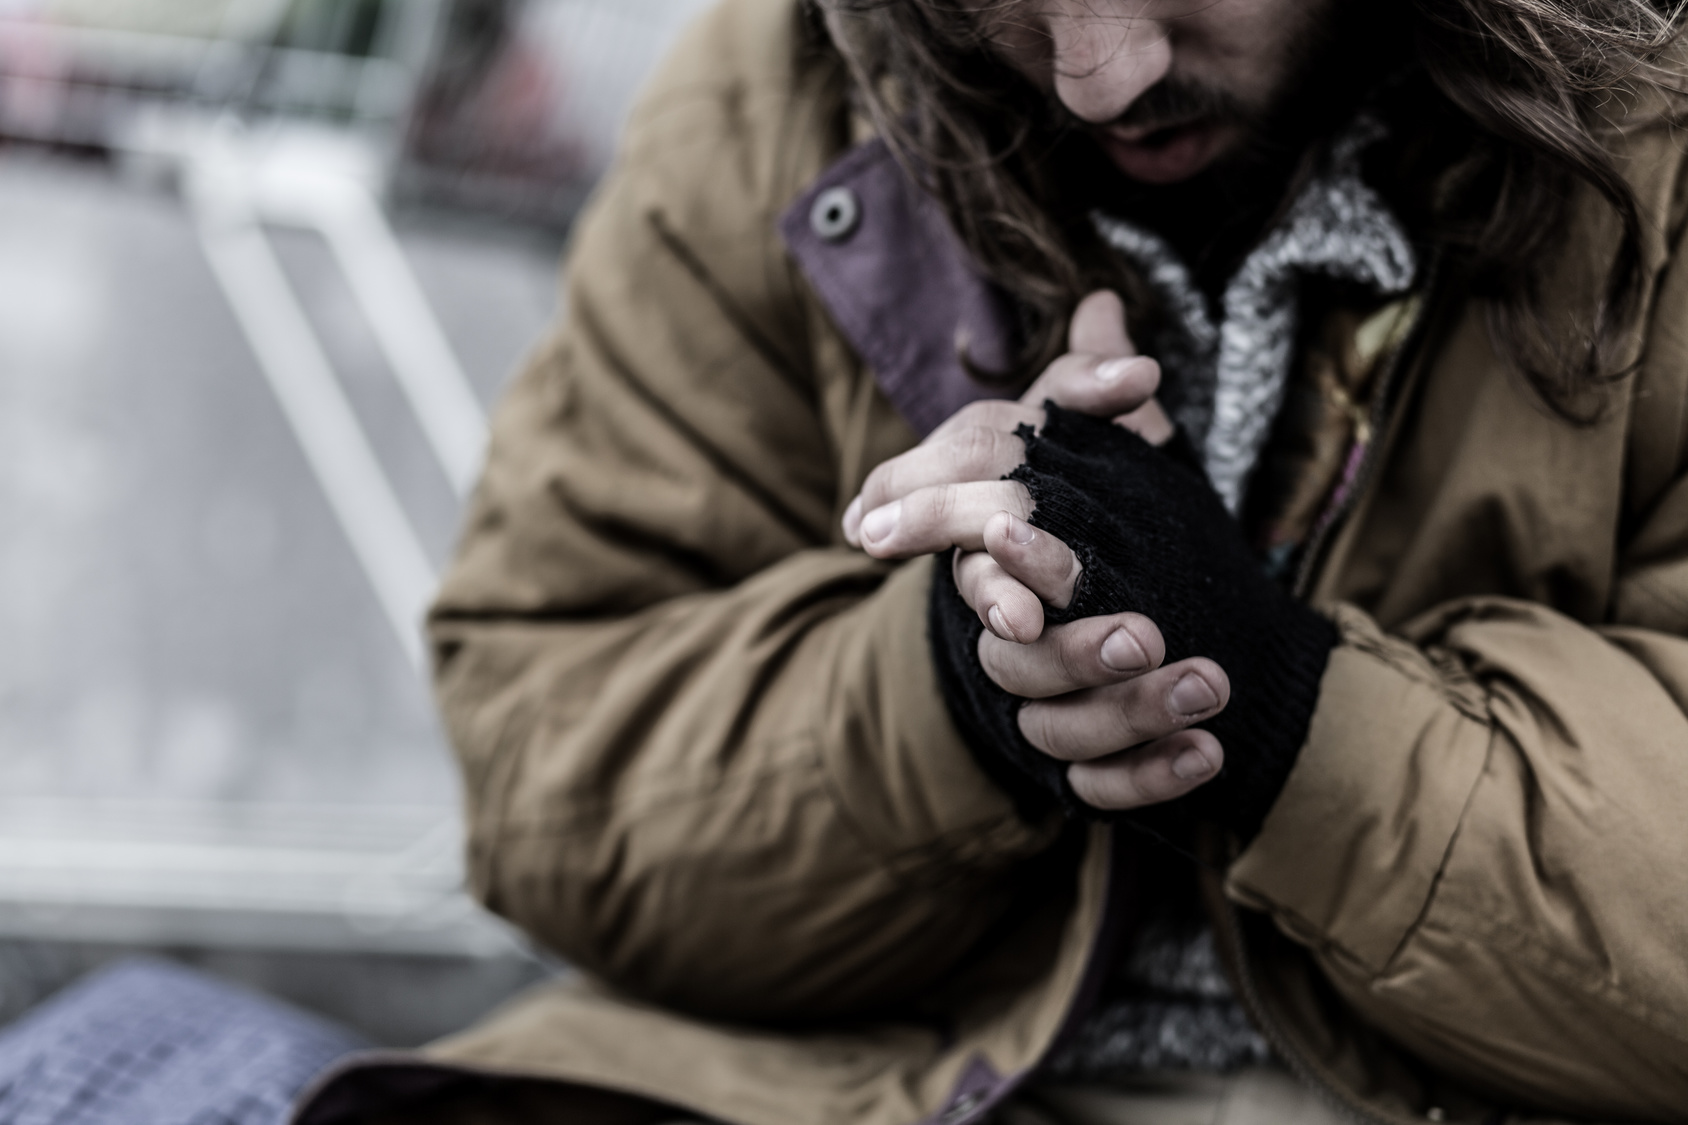 Case Management Software for Shelters & Homeless Care Agencies